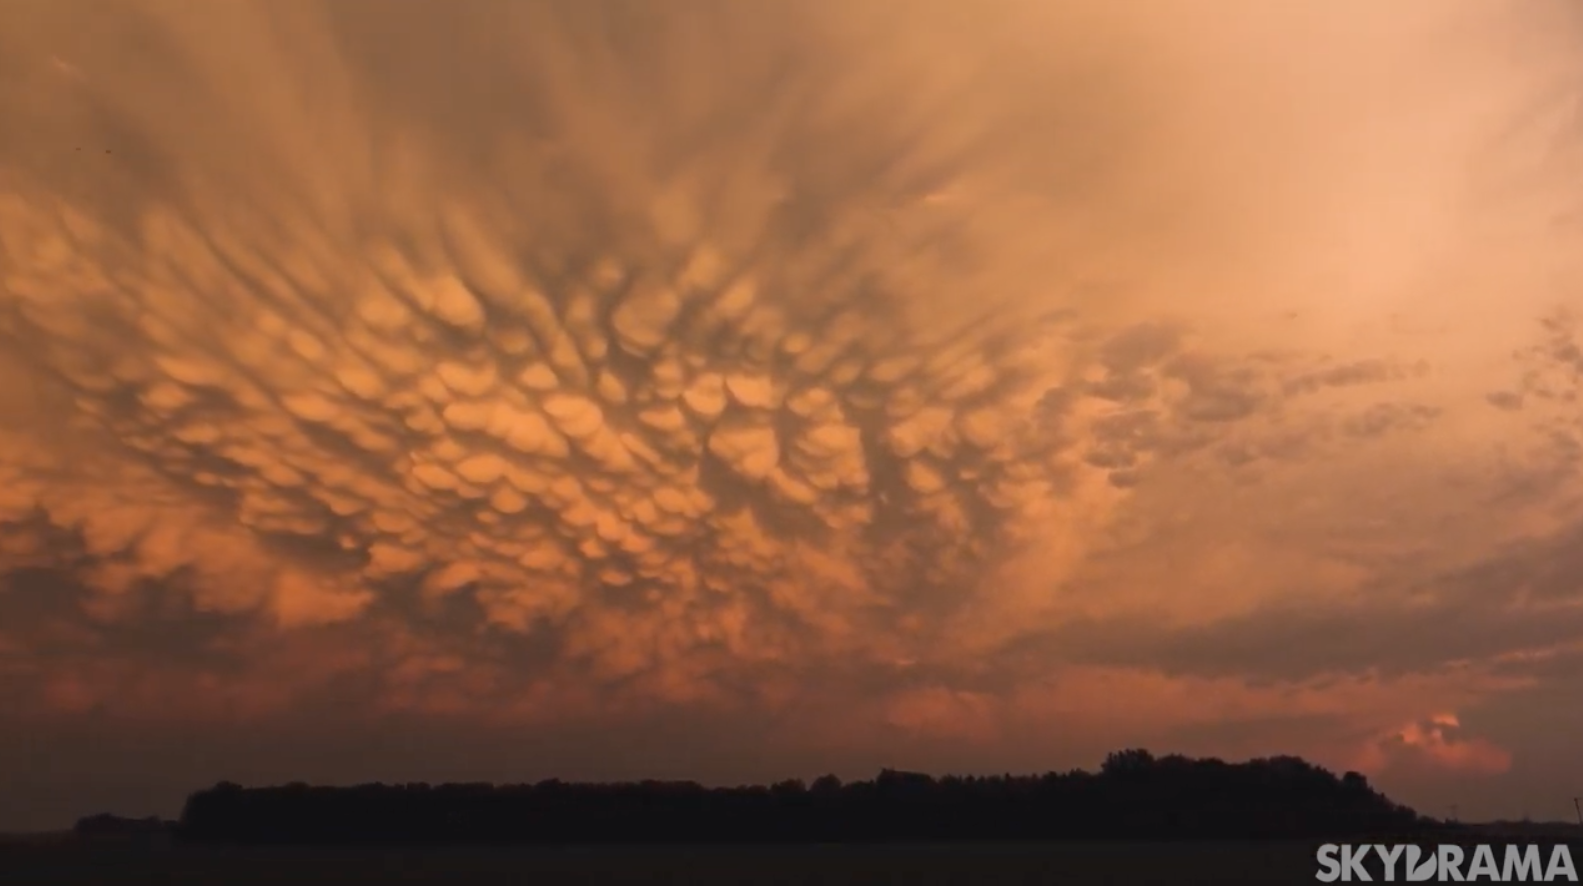 These mammatus clouds are incredible